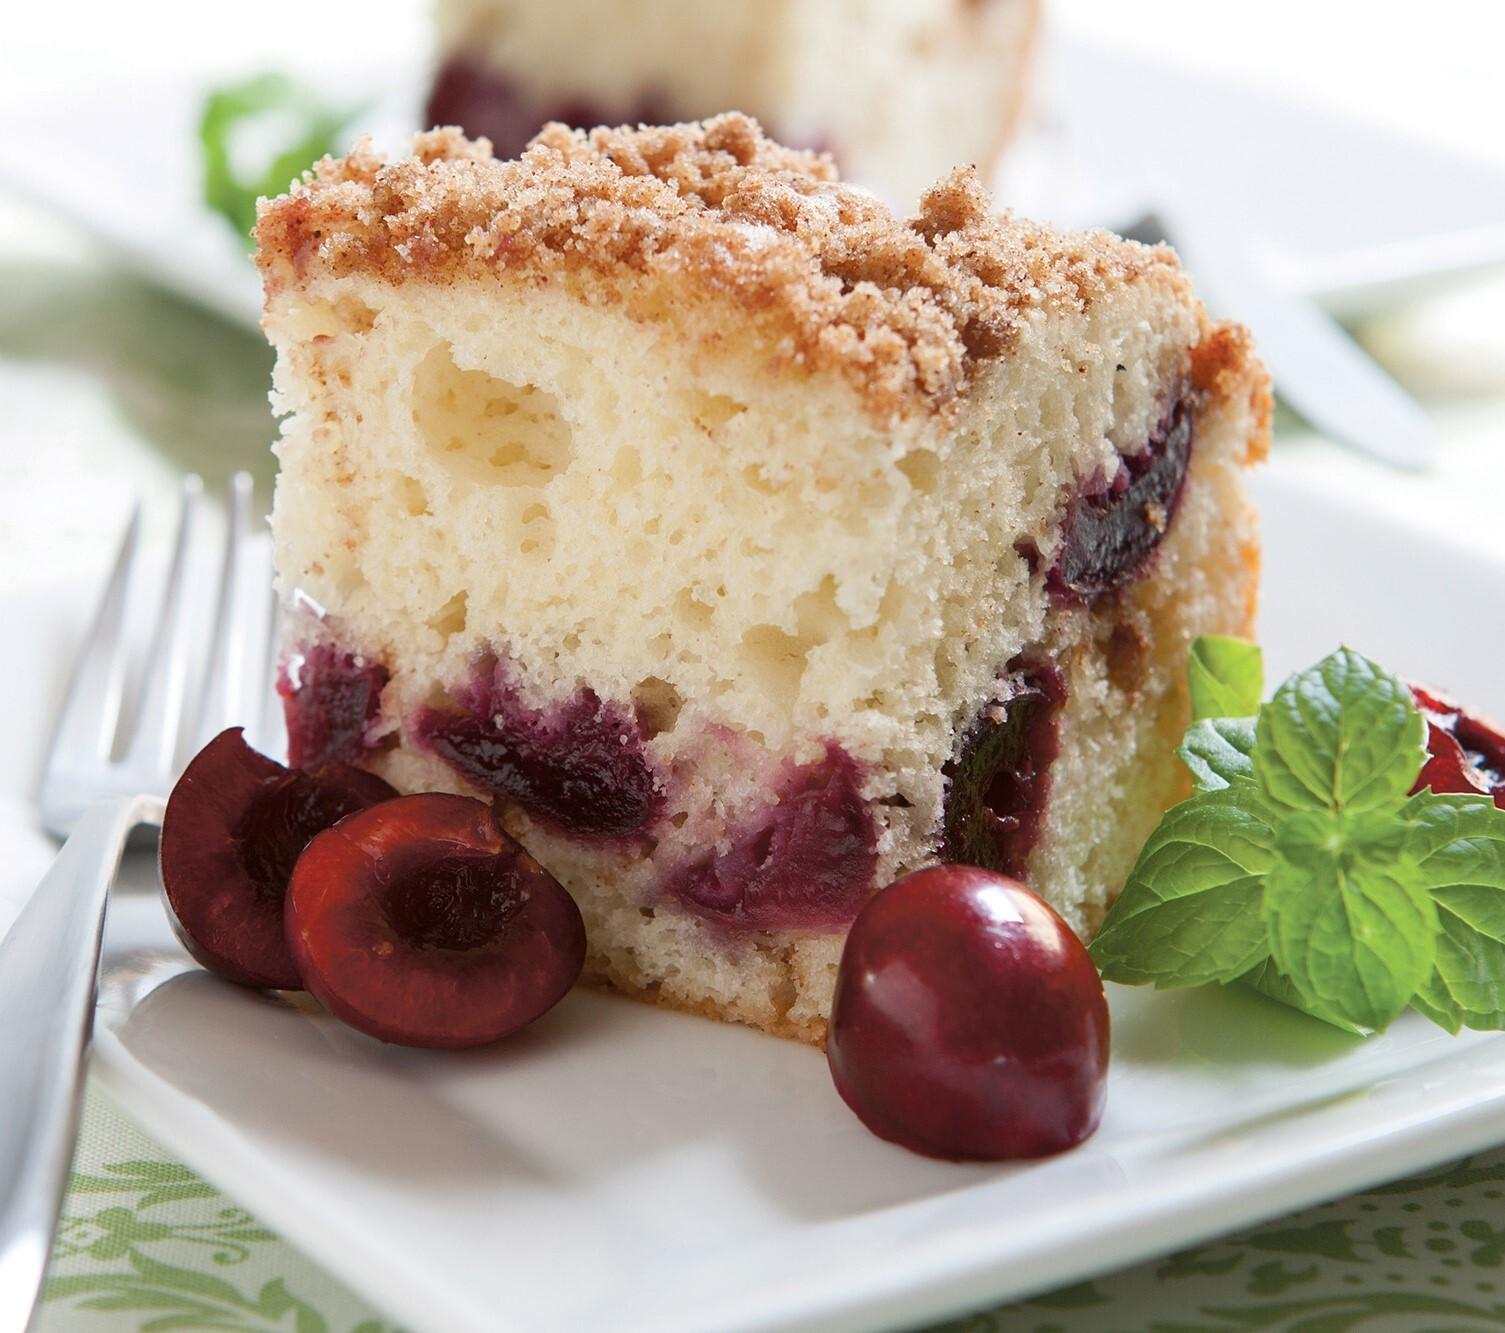 Slice of crumb-topped cherry cake on a plate with fresh cherries and mint leaves.